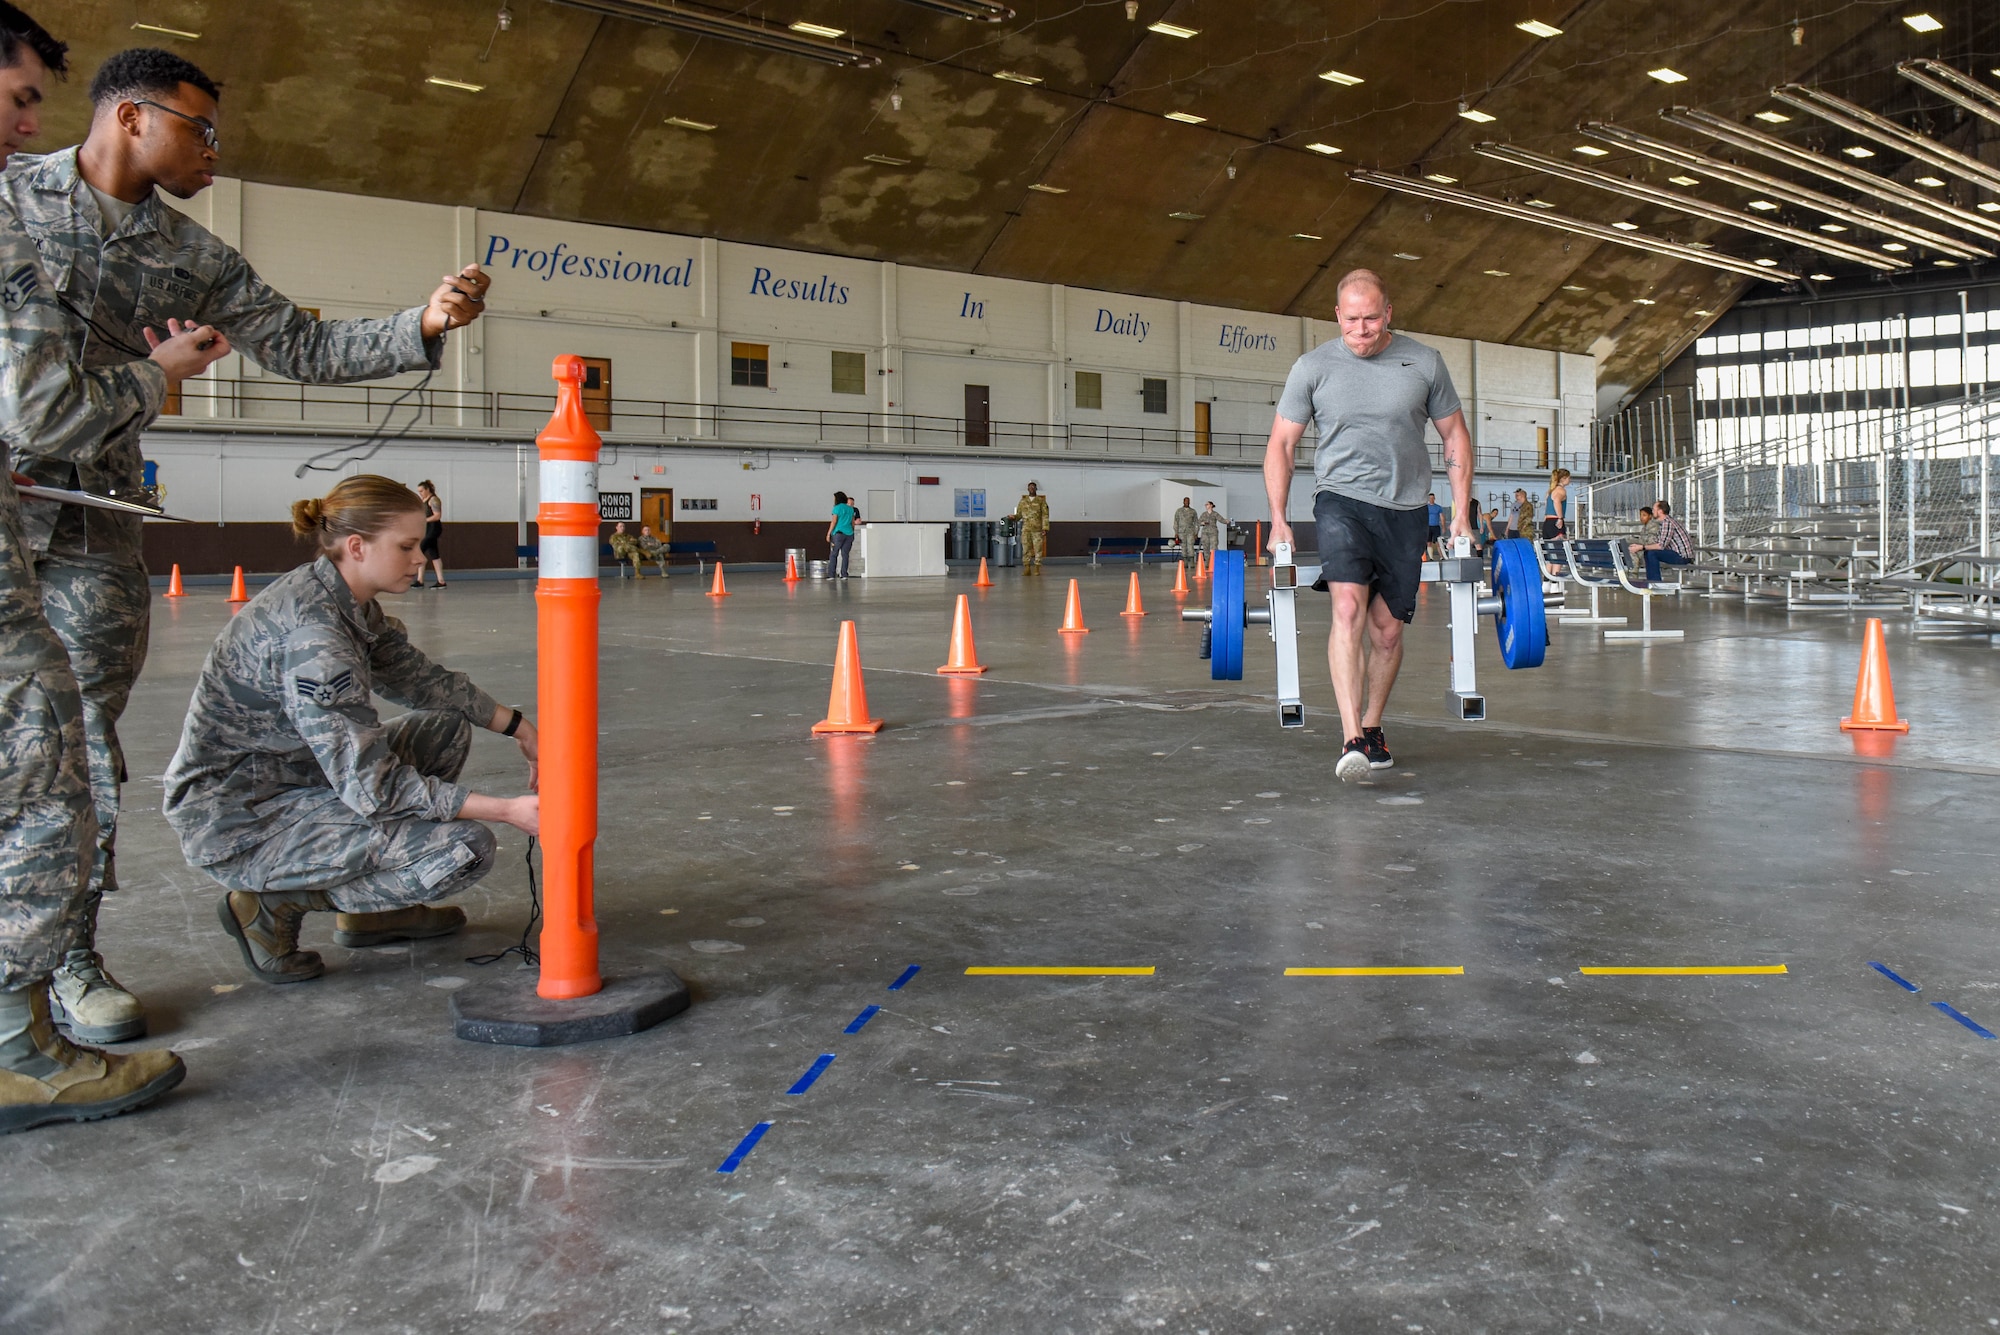 Tech. Sgt. Dustin Jespersen, a 28th Operations Squadron survival, evasion, resistance and escape specialist, performs a farmer’s carry during the Ellsworth Air Force Base’s Strongest Competition at the Pride Hangar on Ellsworth AFB, S.D., April 25, 2019. The free event was hosted by the 28th Force Support Squadron. Competitors performed feats of strength throughout five different exercises: max-out deadlift, farmer’s carry, keg run, tire flip and vehicle pull. Jespersen placed first as the strongest male. (U.S. Air Force photo by Tech. Sgt. Jette Carr)